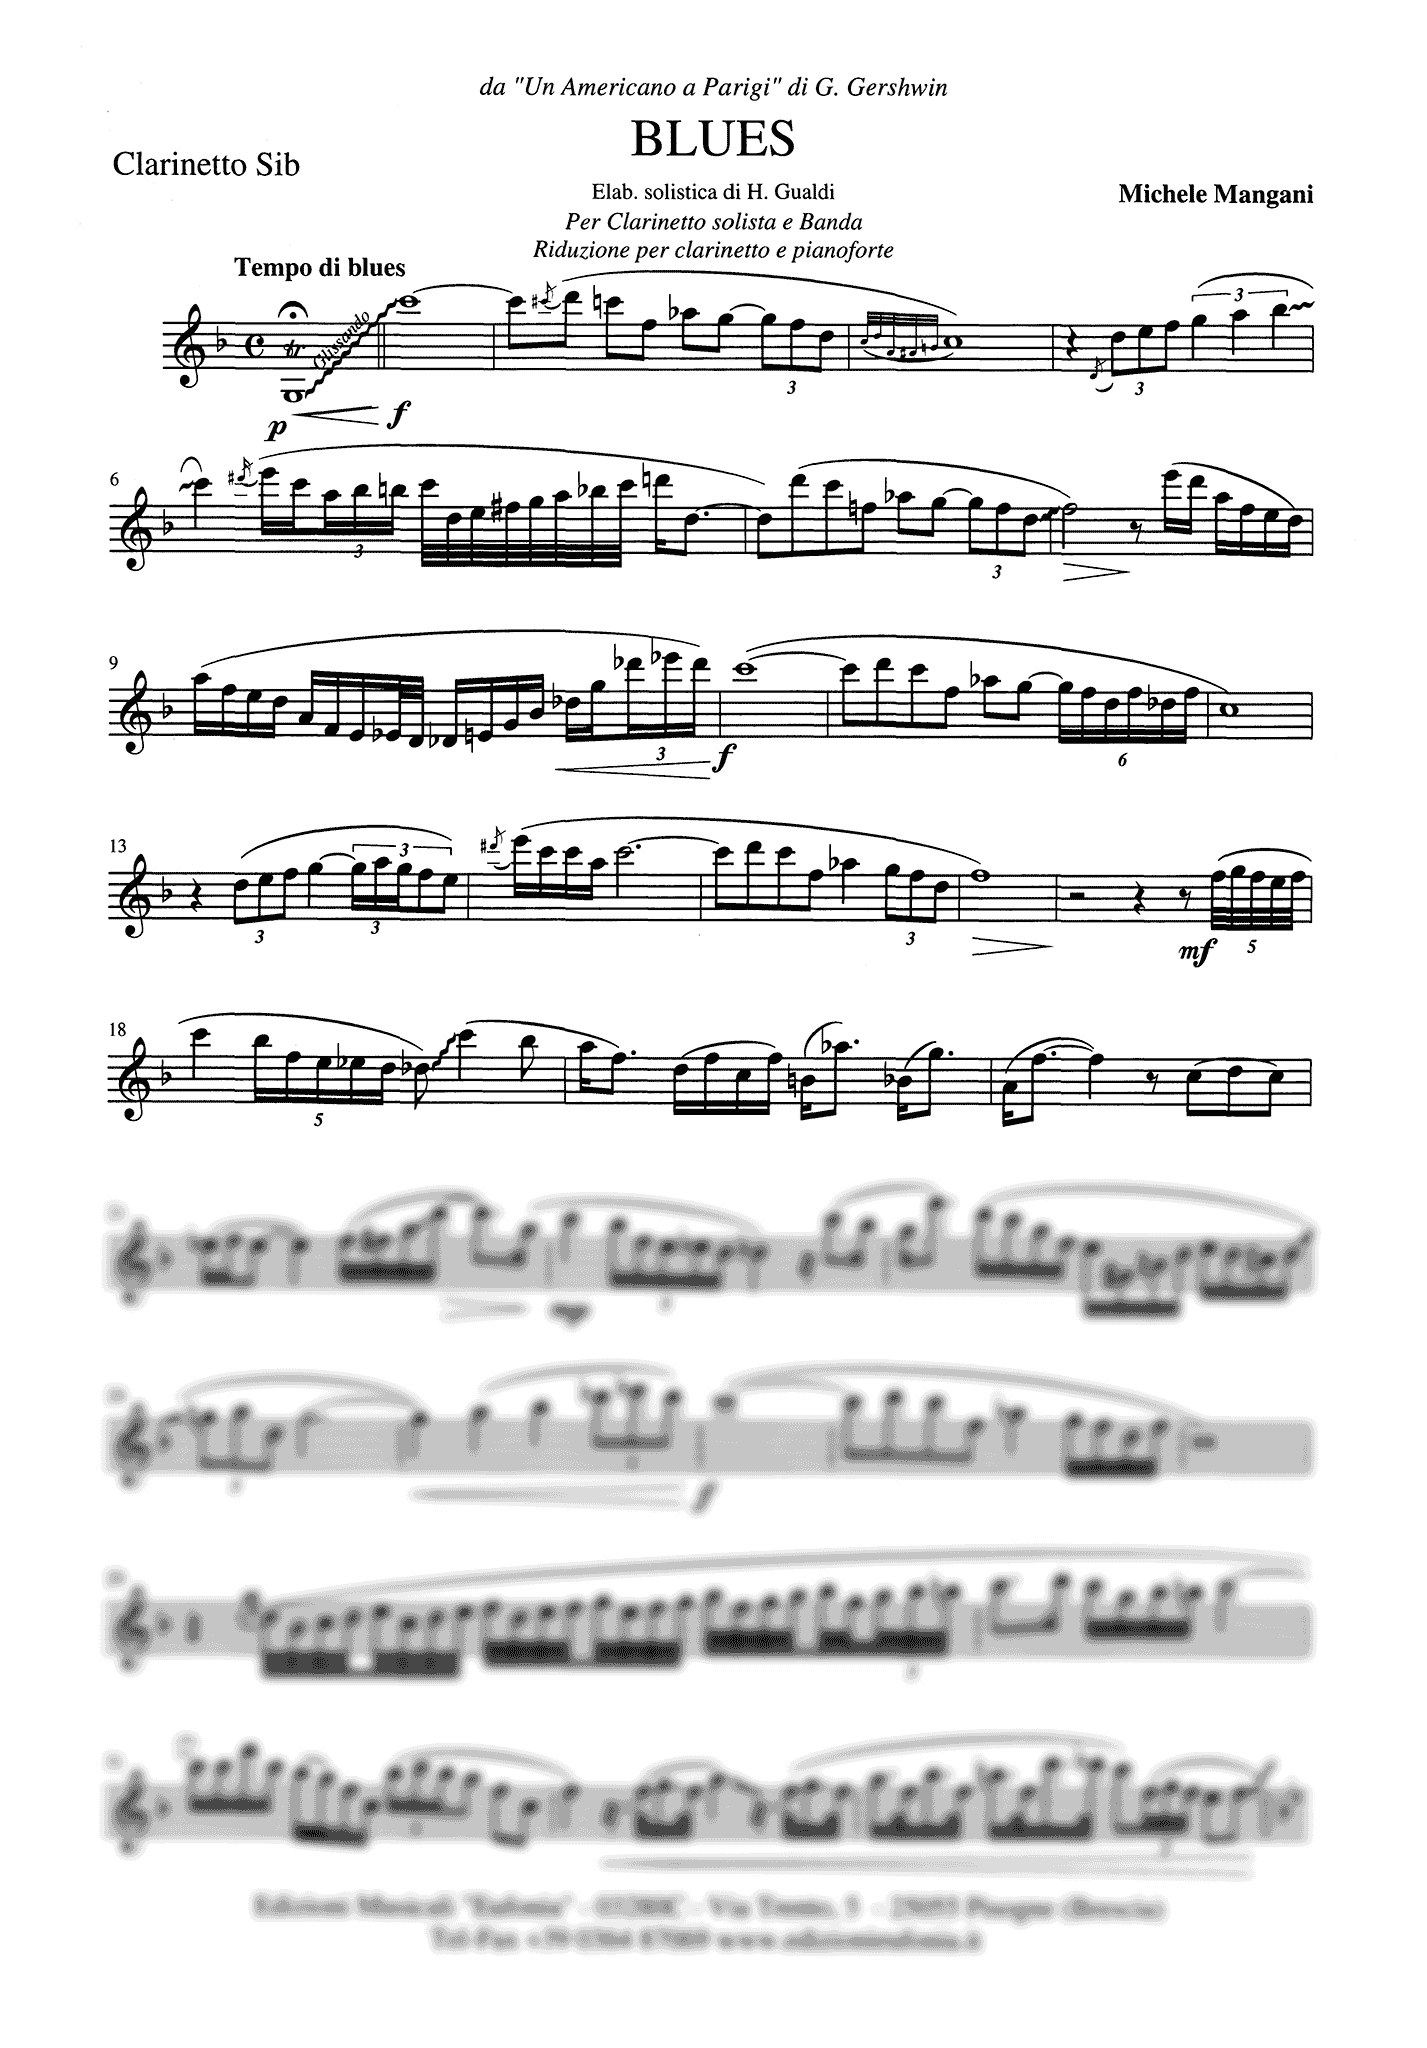 Gershwin Blues, from ‘An American in Paris’ clarinet and piano arrangement solo part